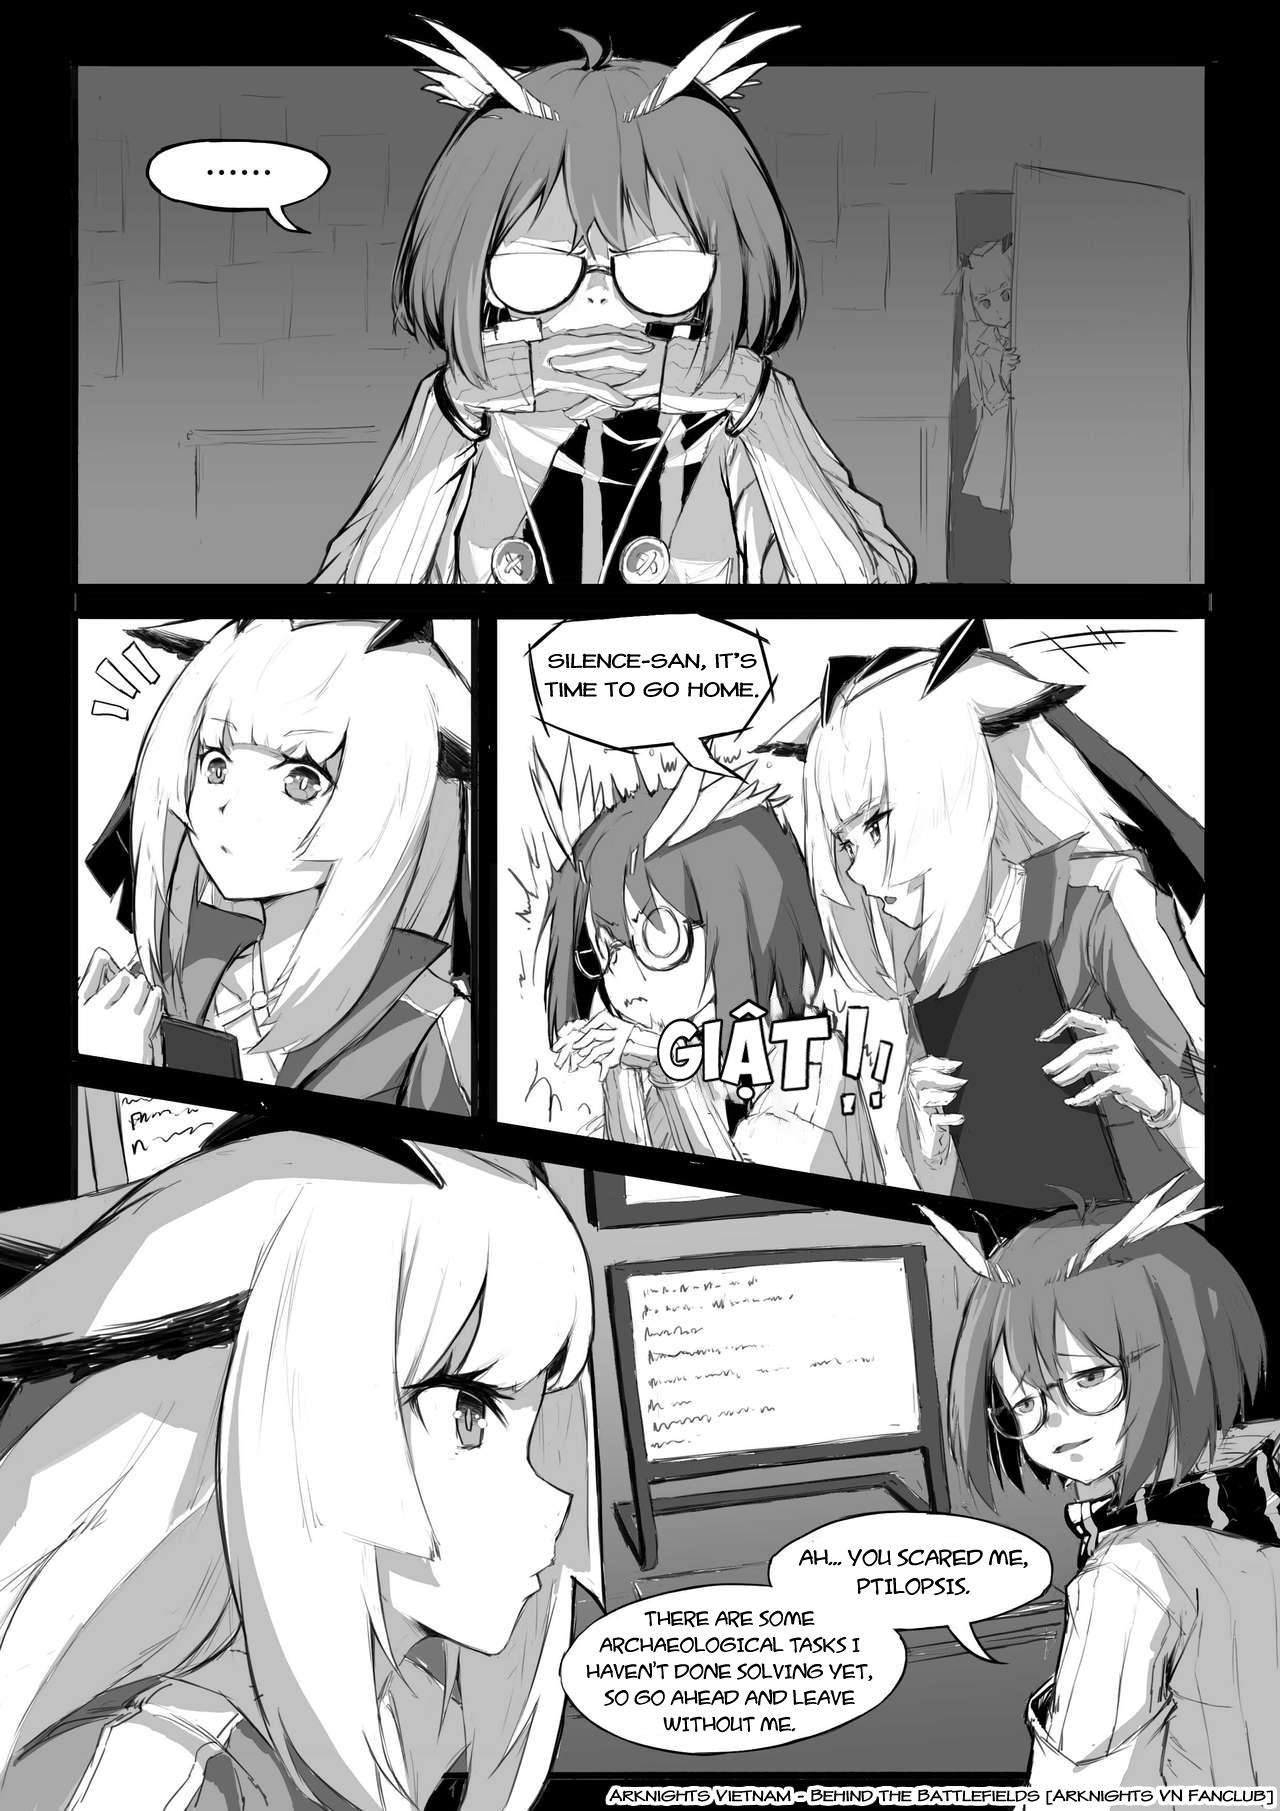 Groping The Story Where Ptilopsis Becomes A Very Little Girl - Arknights Denmark - Page 2